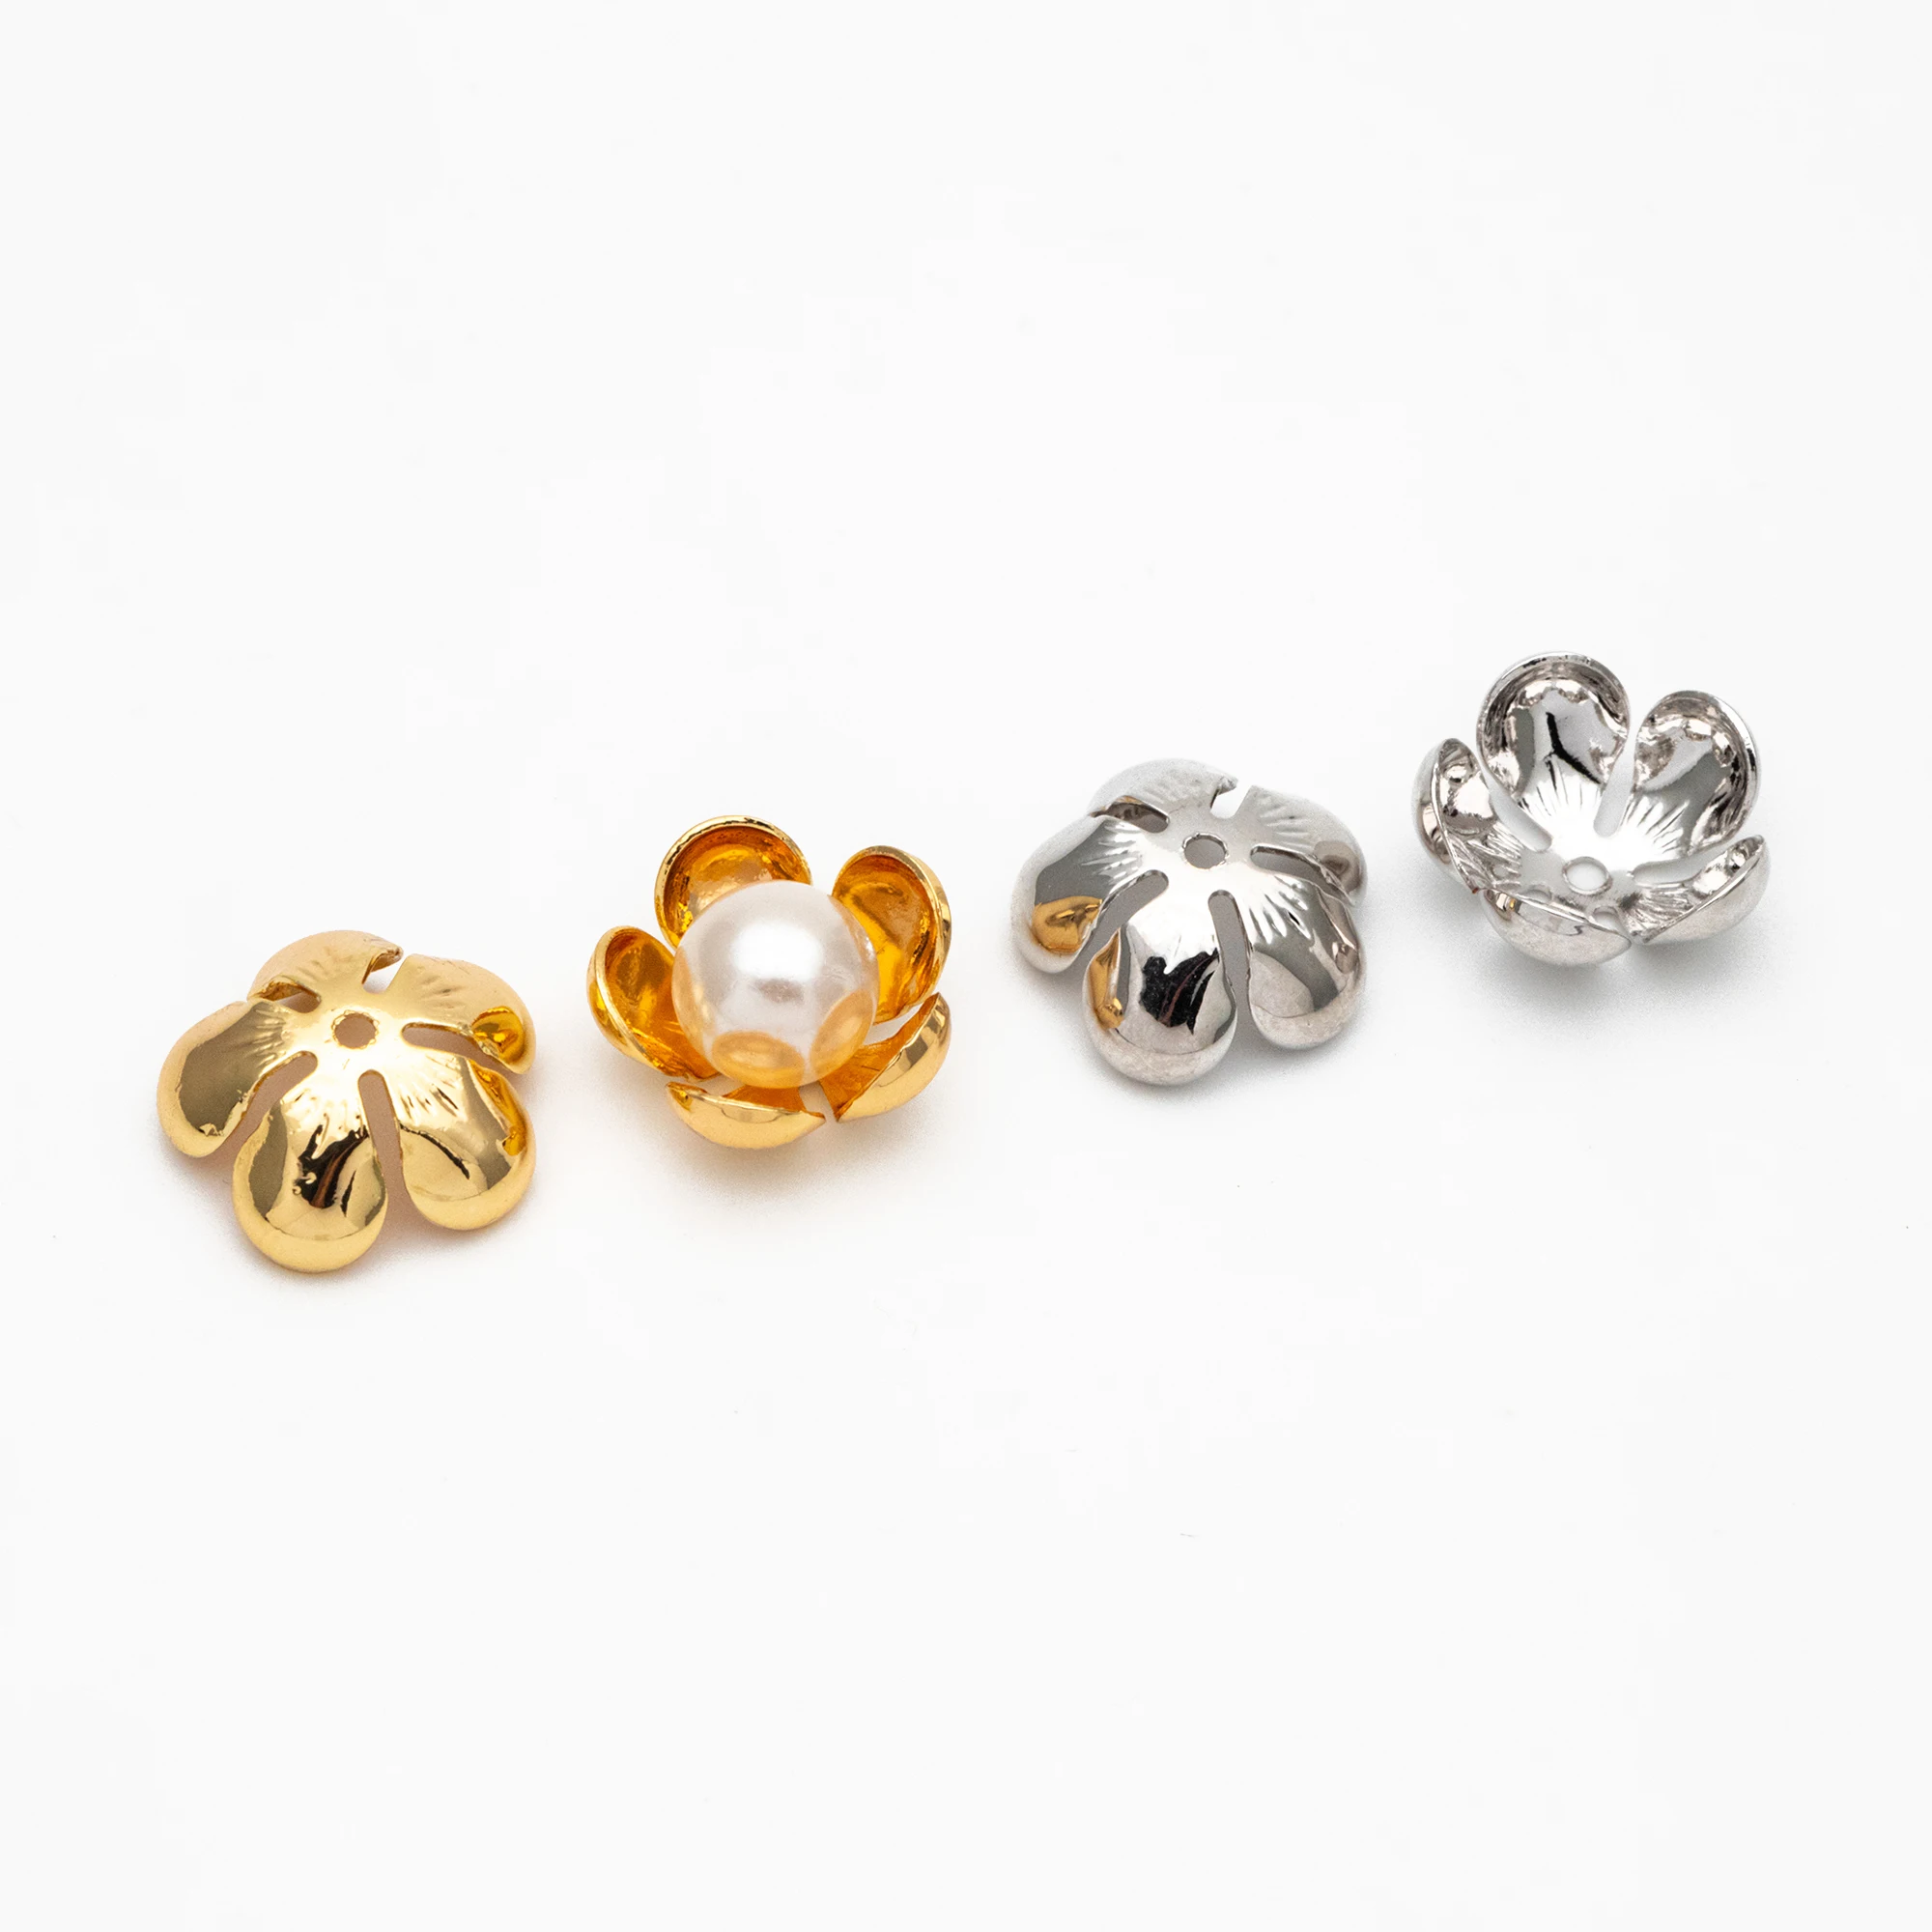 

10pcs Gold/ Silver Floral Bead Caps 13mm, Fit 12mm Beads, Gold/ Rhodium Plated Brass, Lead Nickel Free (GB-055)